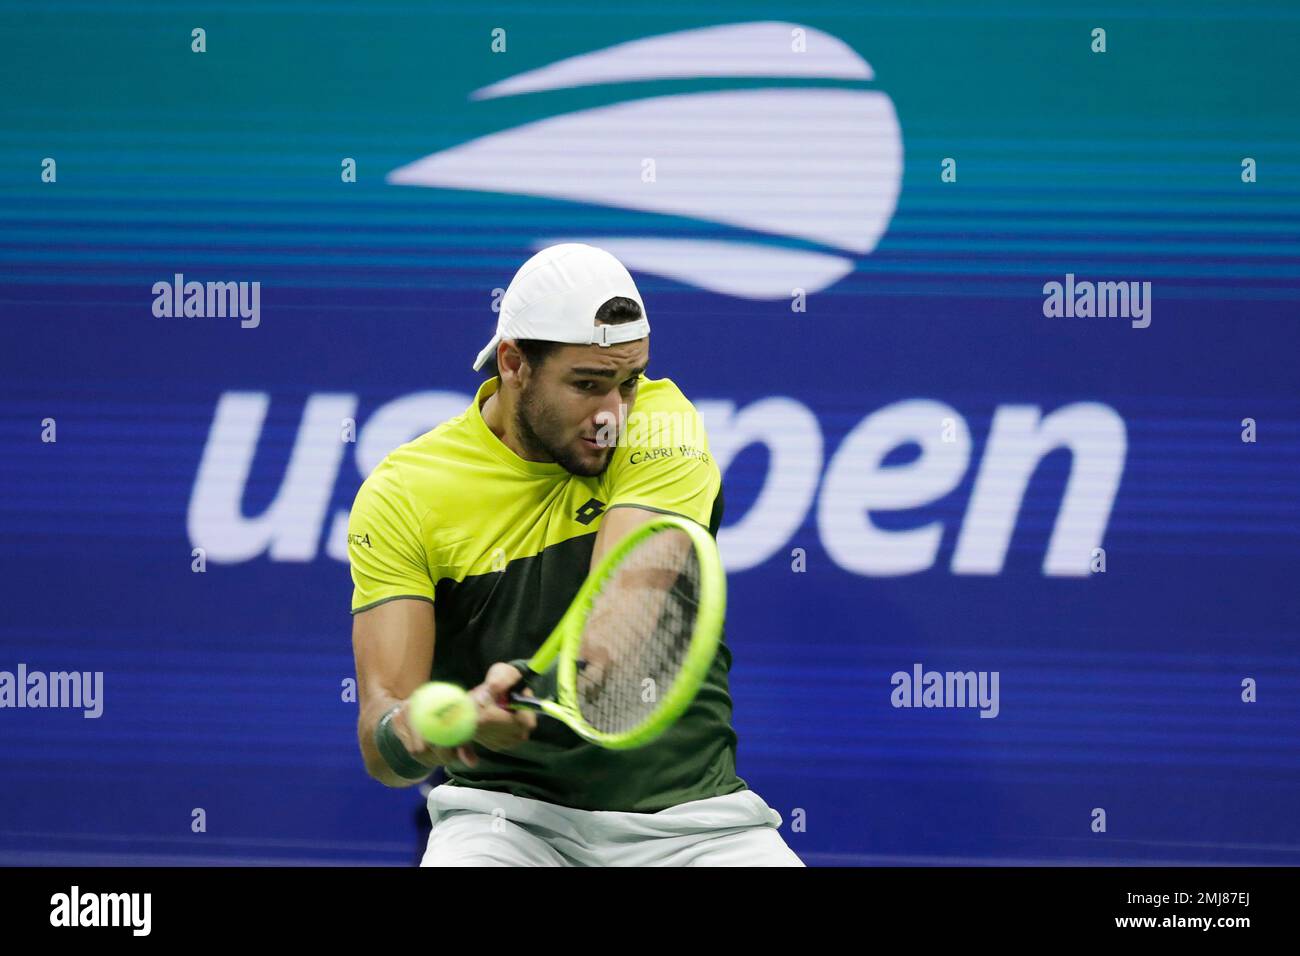 Matteo Berrettini, of Italy, returns a shot to Rafael Nadal, of Spain, during the mens singles semifinals of the U.S. Open tennis championships Friday, Sept